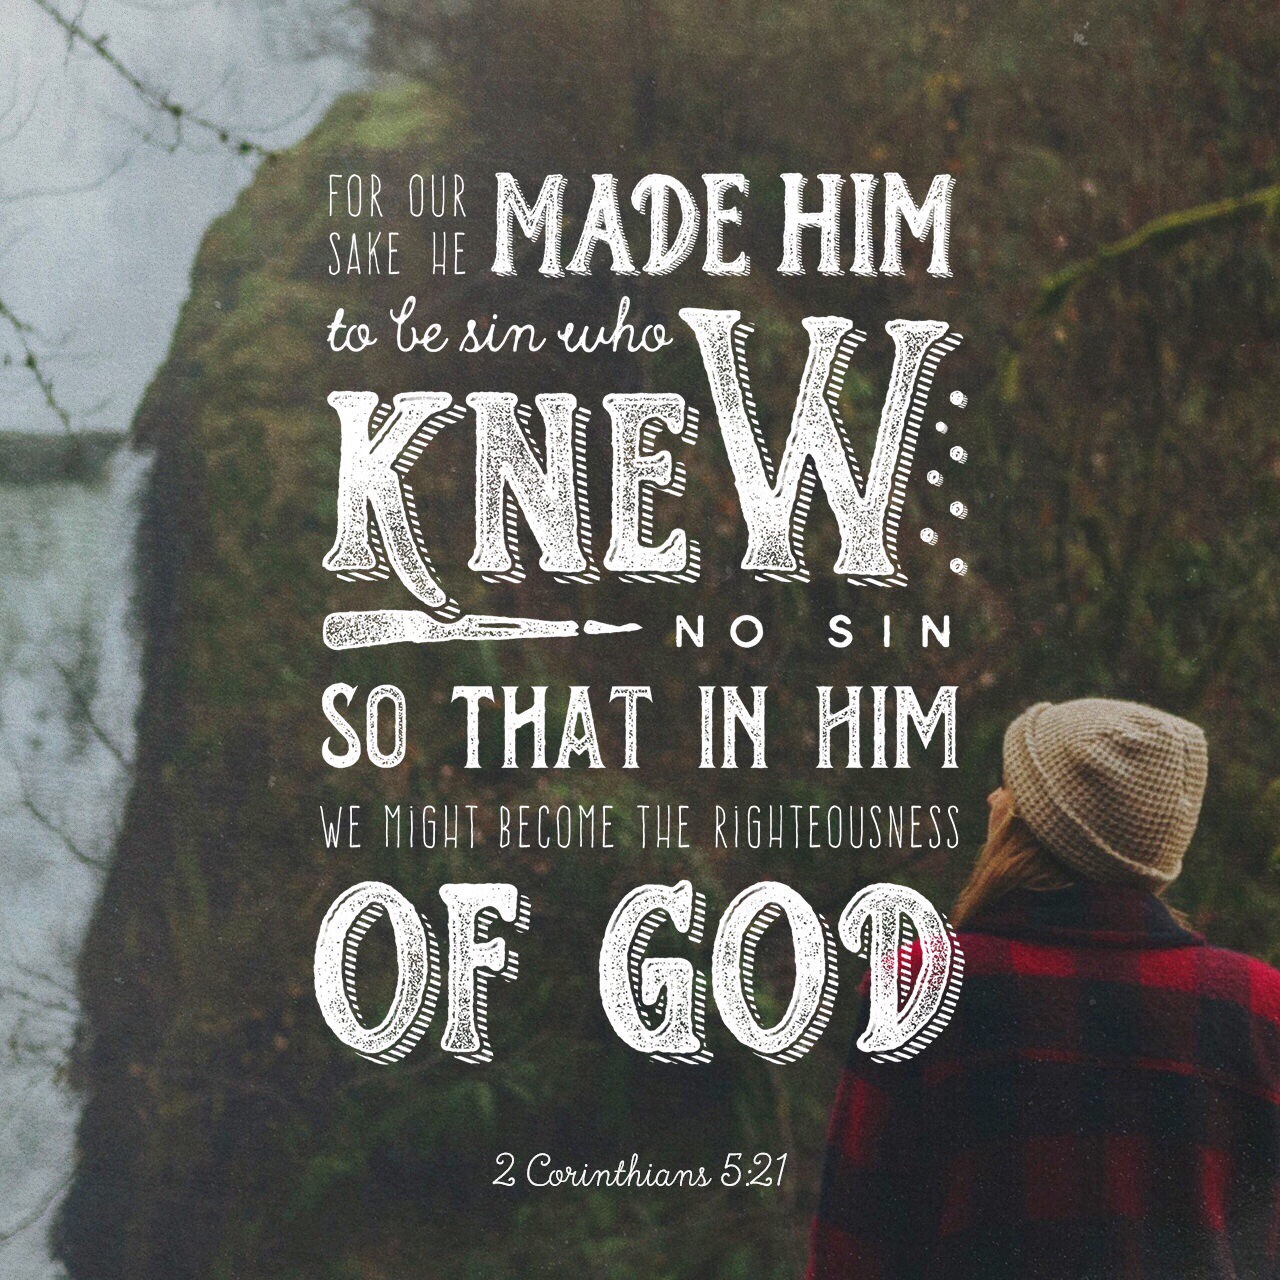 VOTD July 29 - He made Him who knew no sin to be sin on our behalf, so that we might become the righteousness of God in Him. 2 CORINTHIANS‬ ‭5:21‬ ‭NASB‬‬